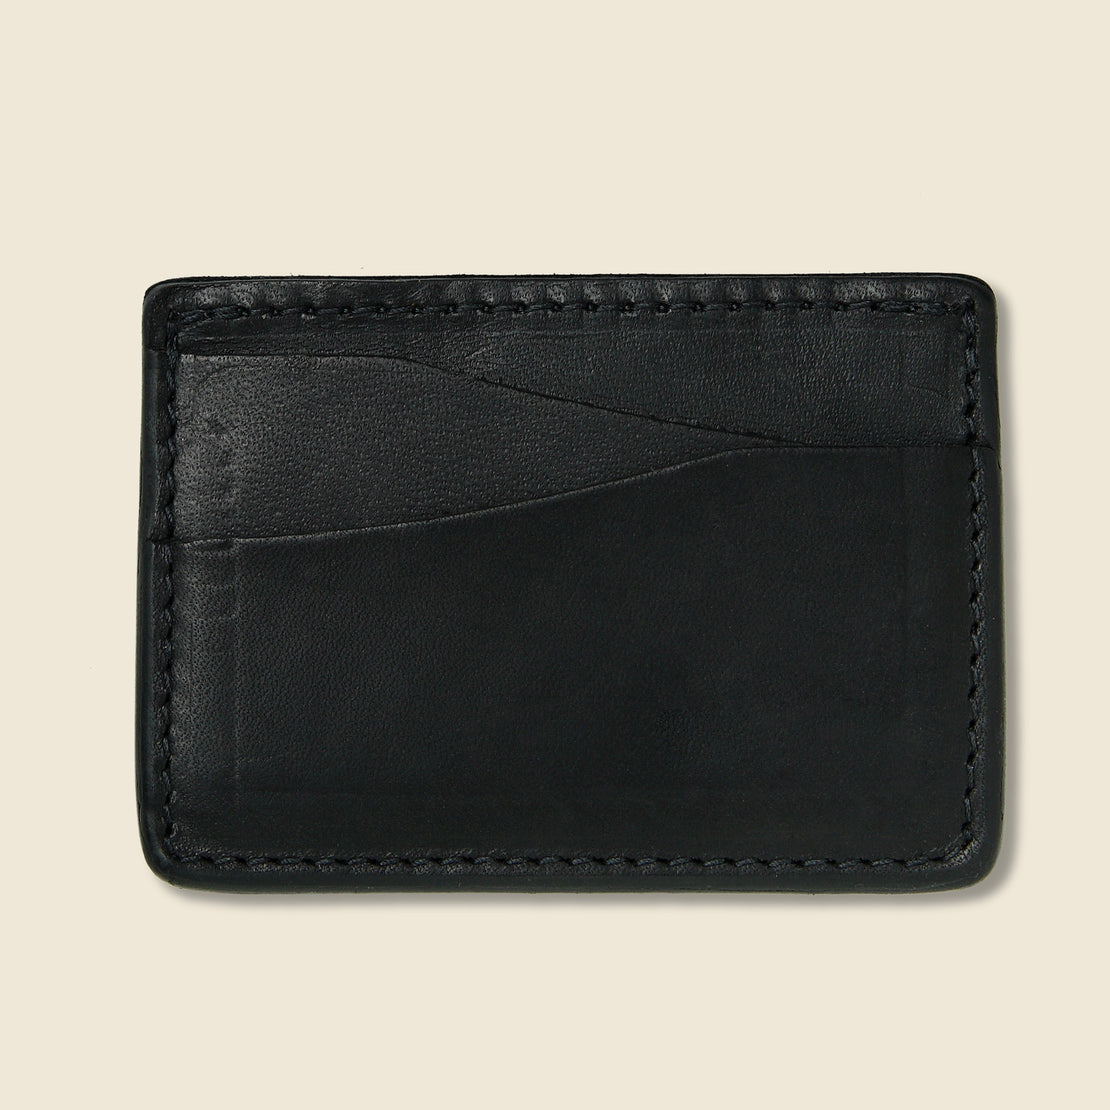 Journeyman Wallet - Black - Tanner - STAG Provisions - Accessories - Wallets